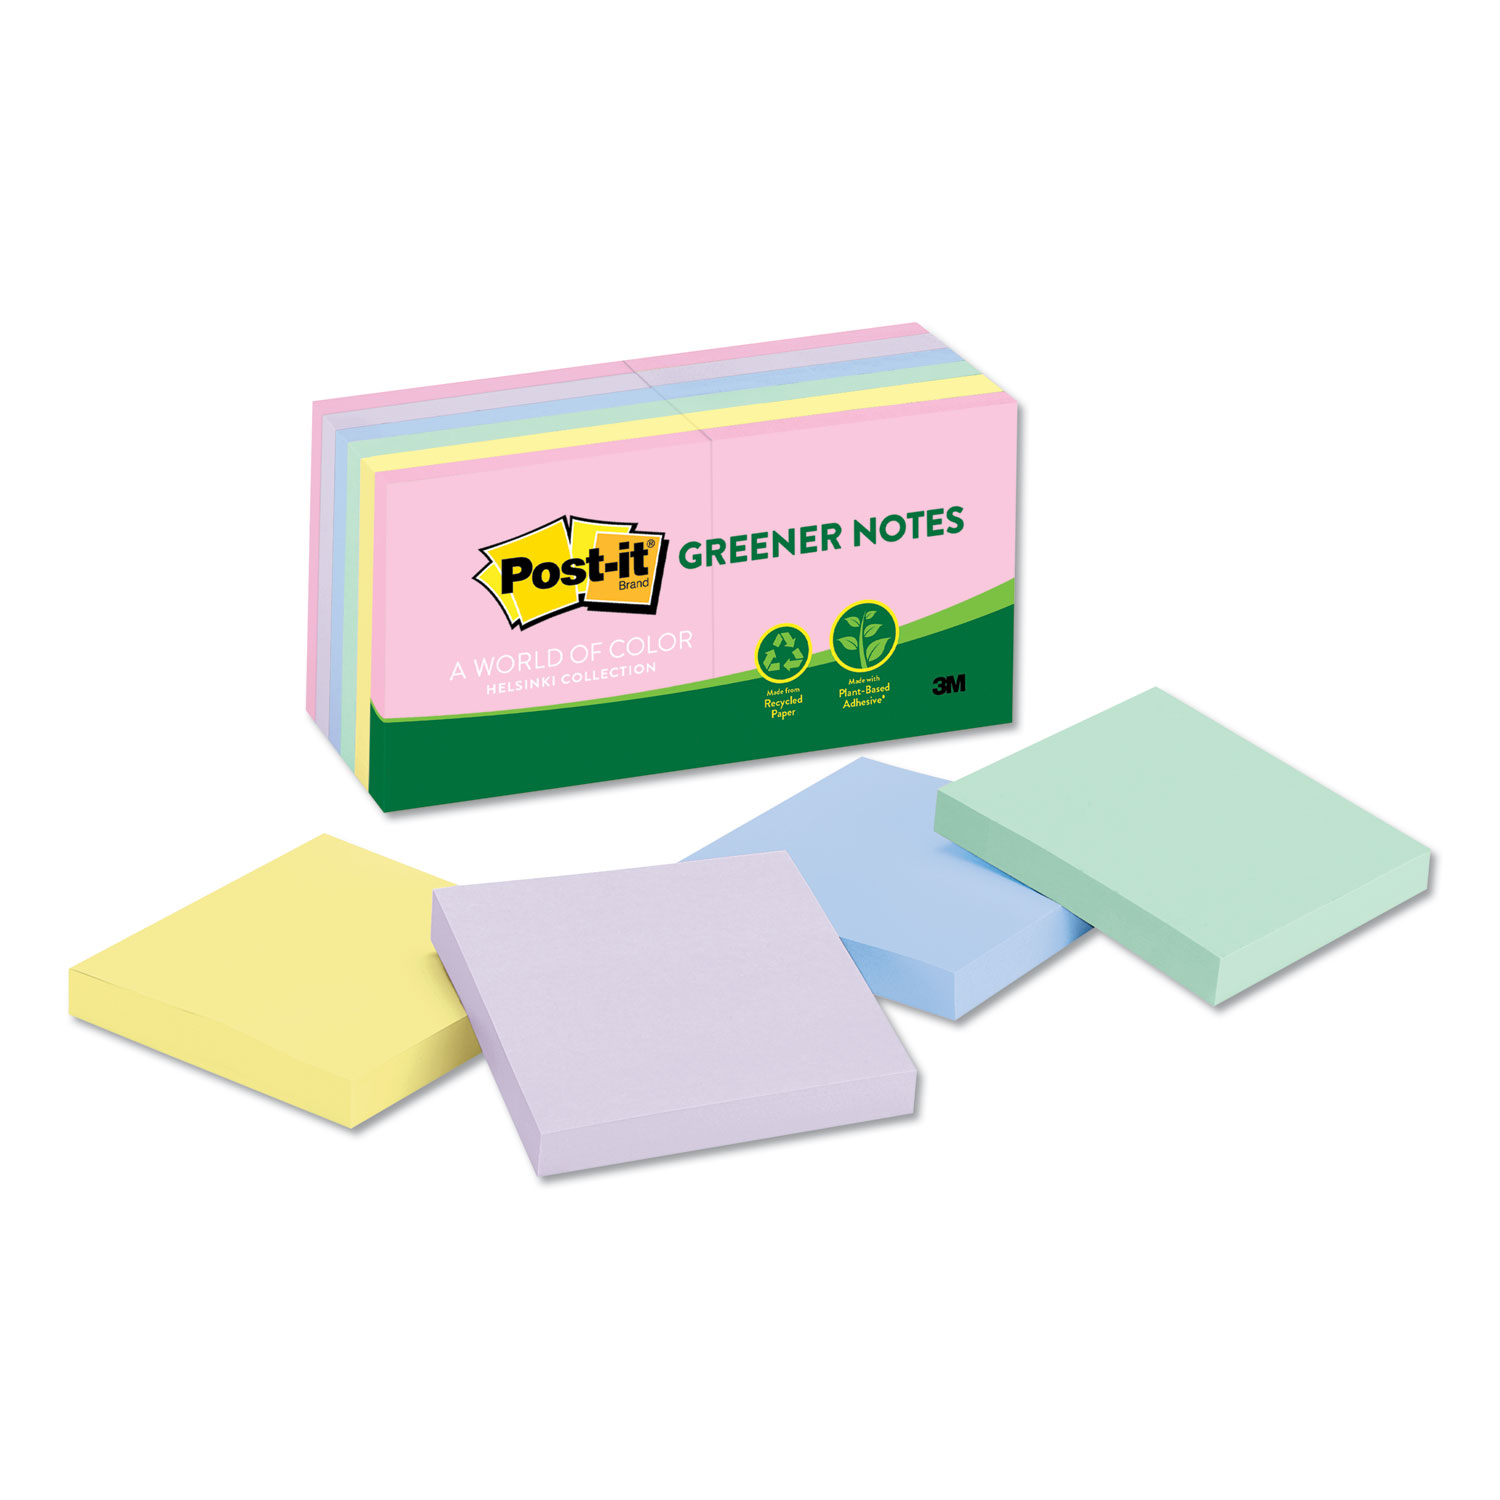  Post-it Greener Notes 654-RP-A Recycled Note Pads, 3 x 3, Assorted Helsinki Colors, 100-Sheet, 12/Pack (MMM654RPA) 